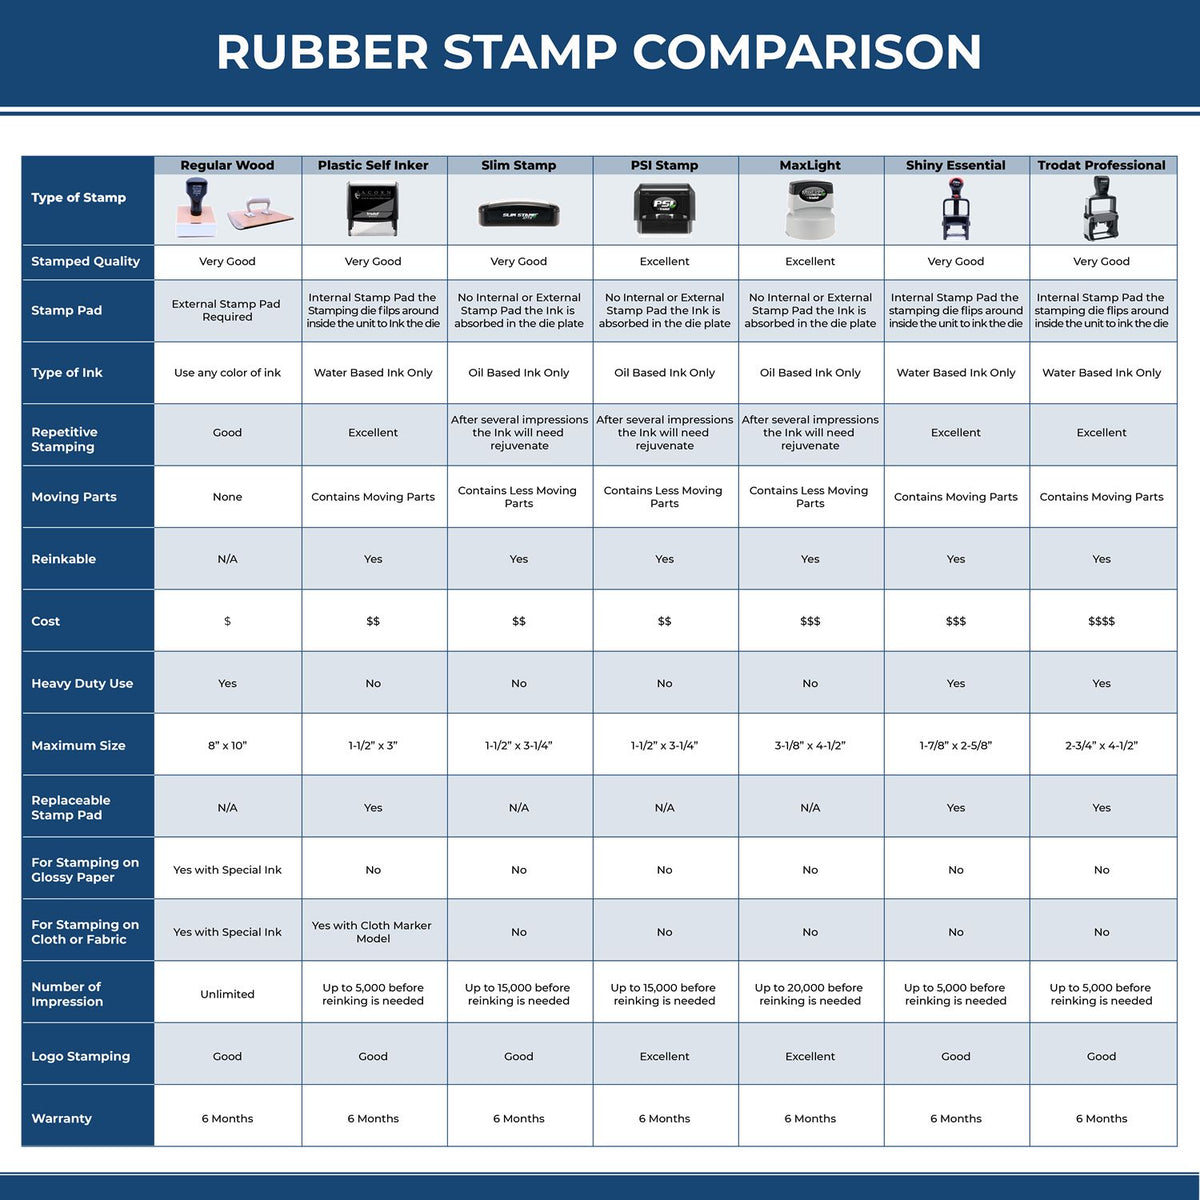 Large Pre-Inked You Insurance has Paid their portion Stamp 5566SLIM Rubber Stamp Comparison